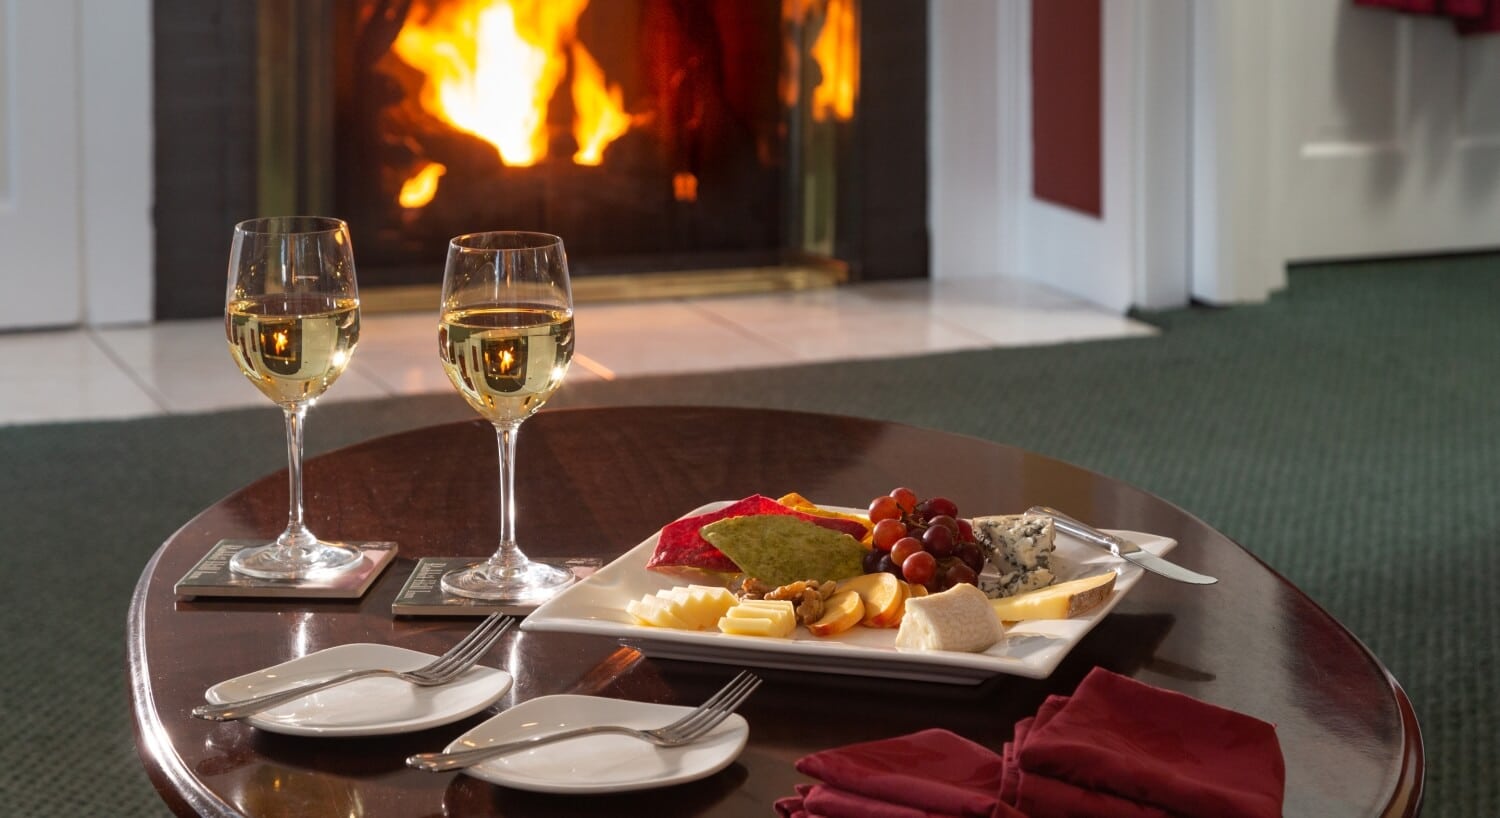 wine and cheese in front of glowing fireplace